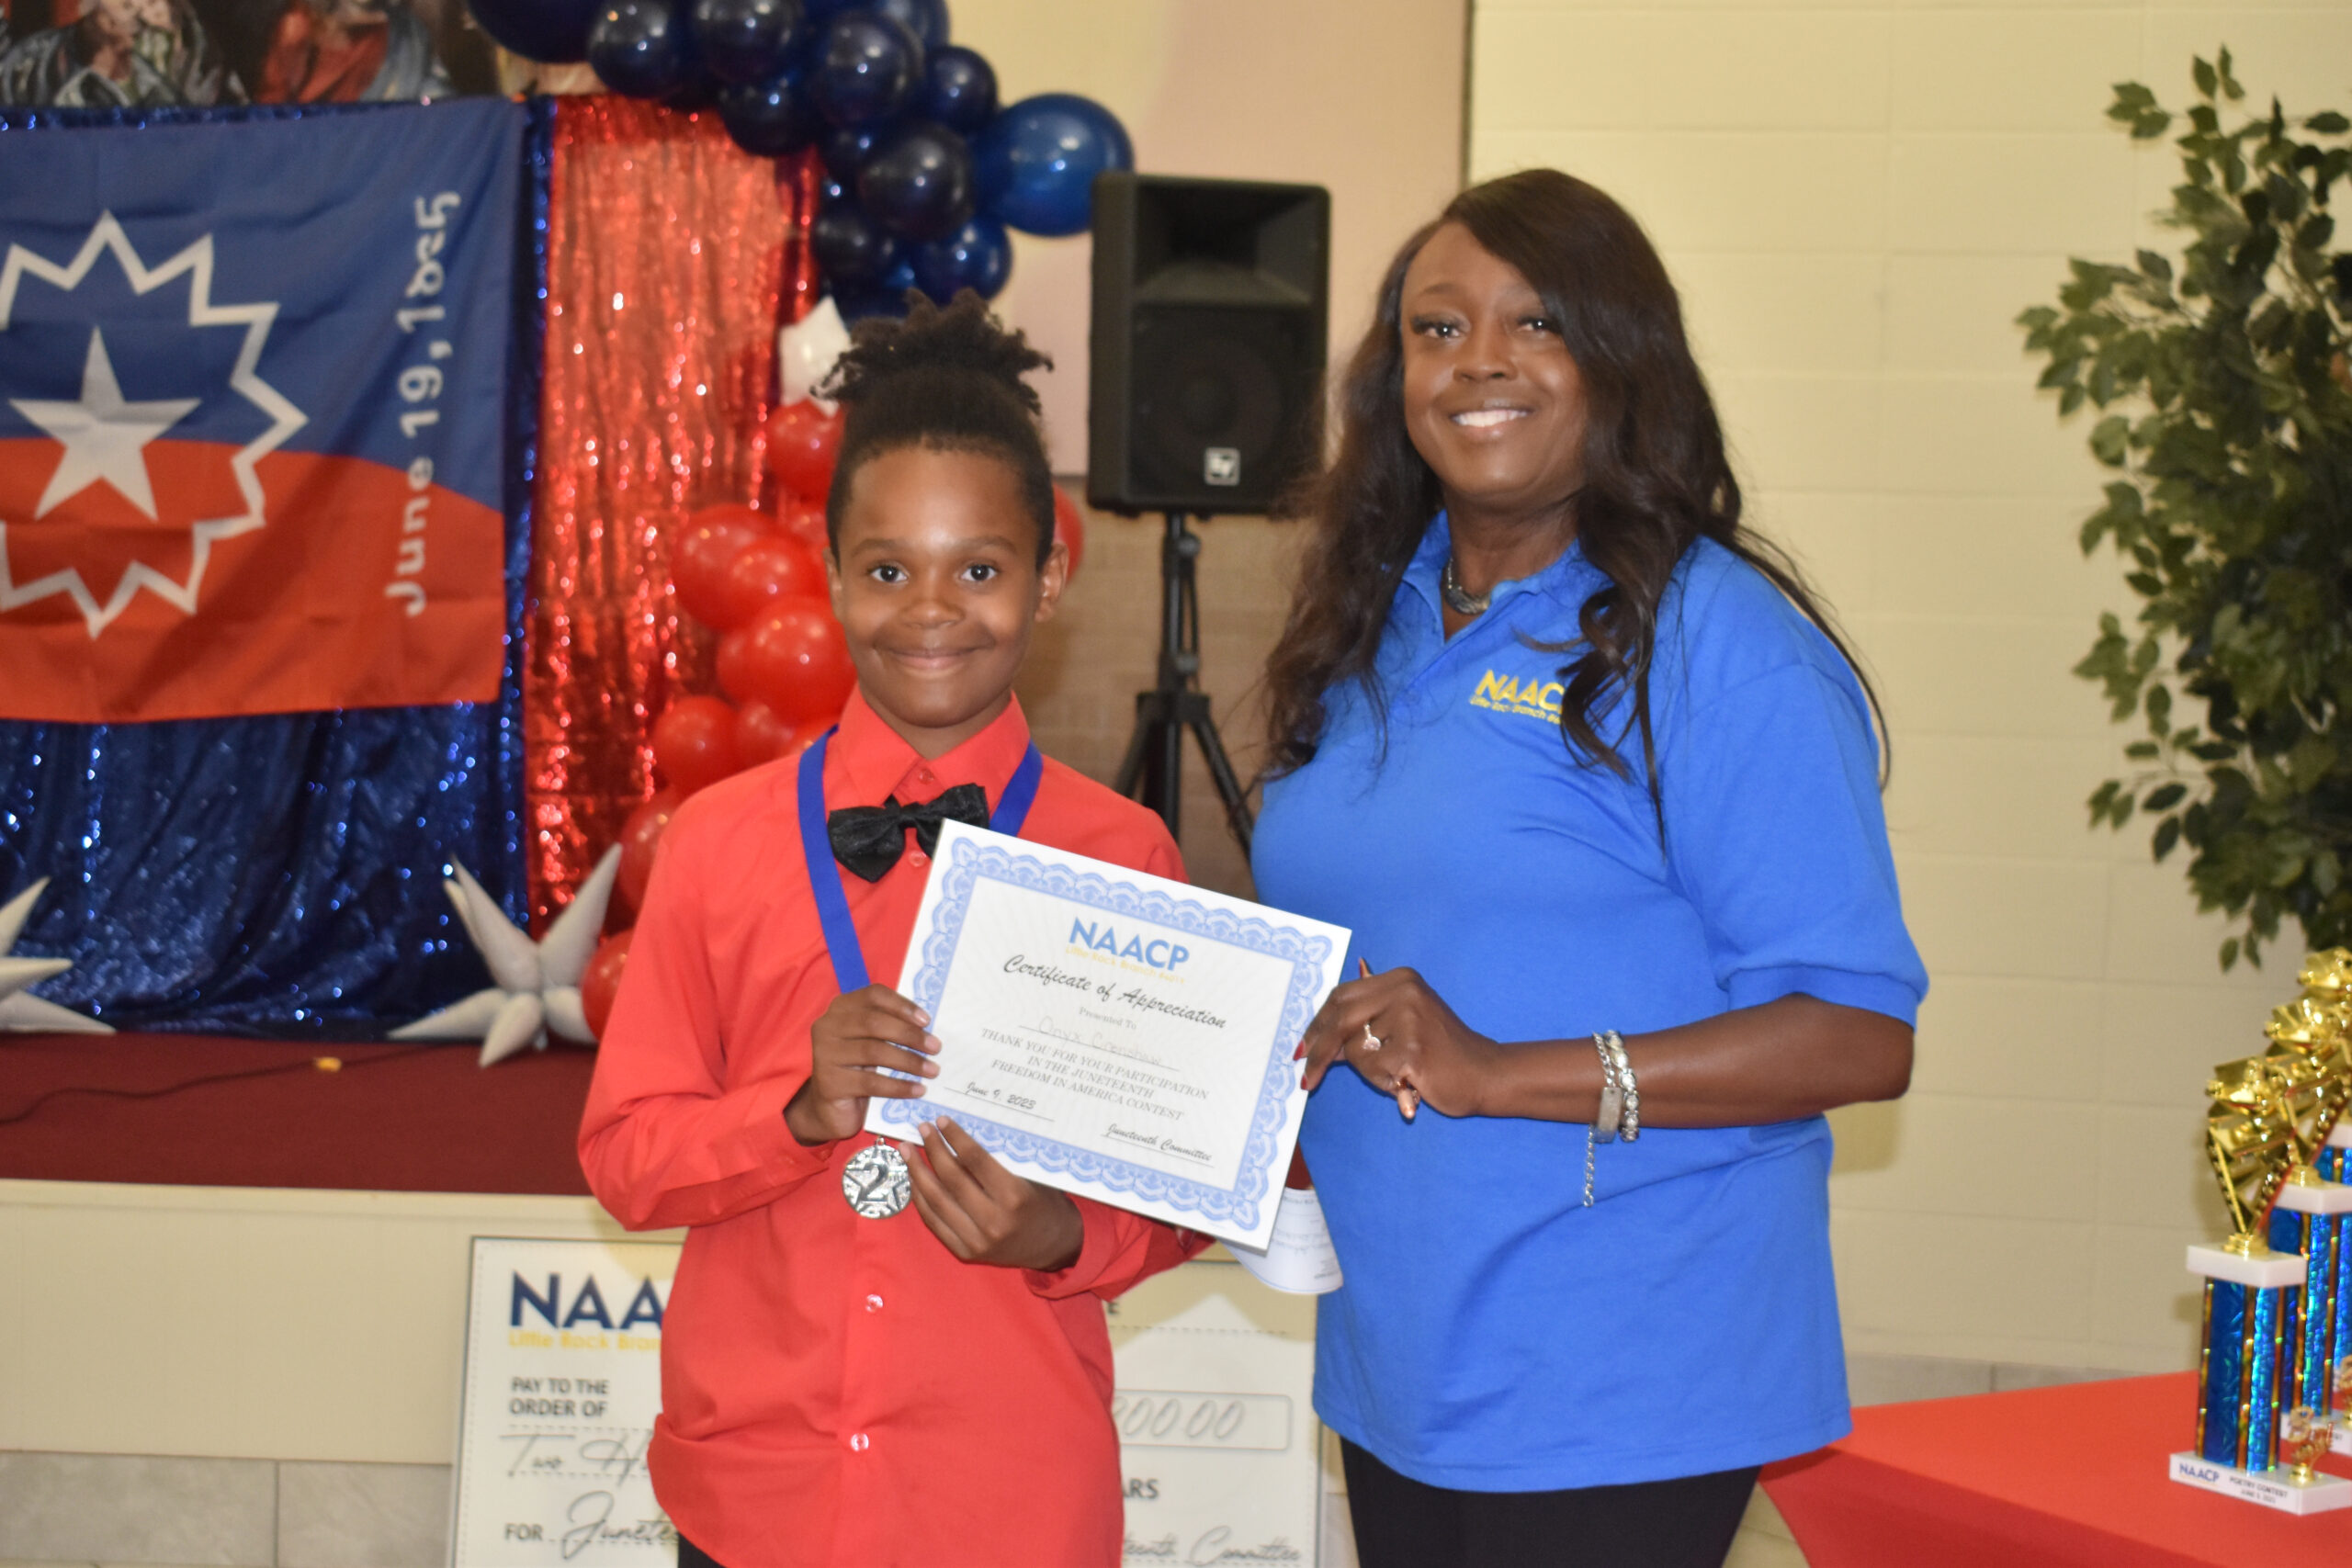 Onyx Crenshaw, 2nd place art catergory, Marie Hollowell, Chair, NAACP Freedom in America event